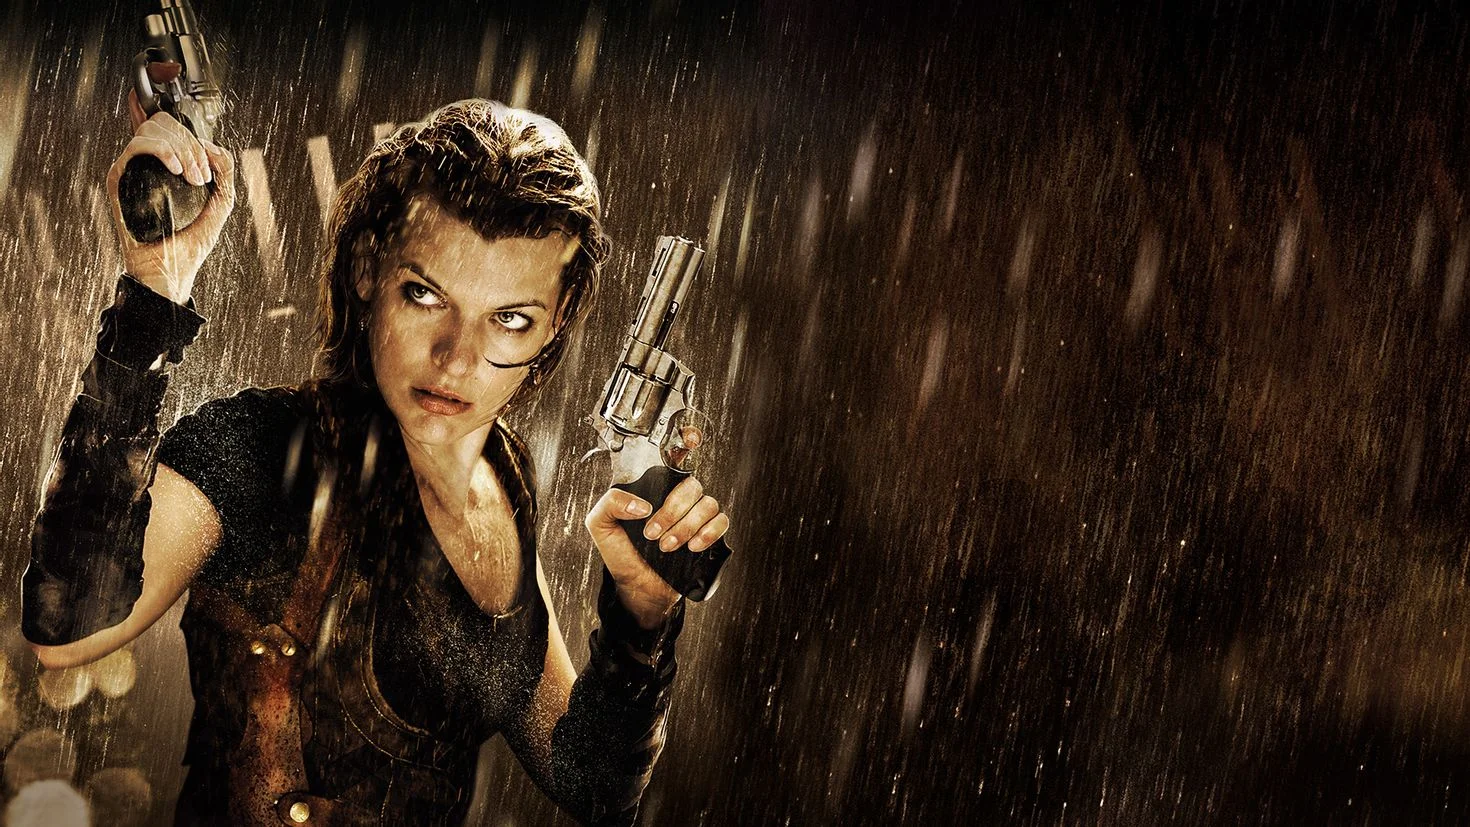 Resident Evil is getting another movie